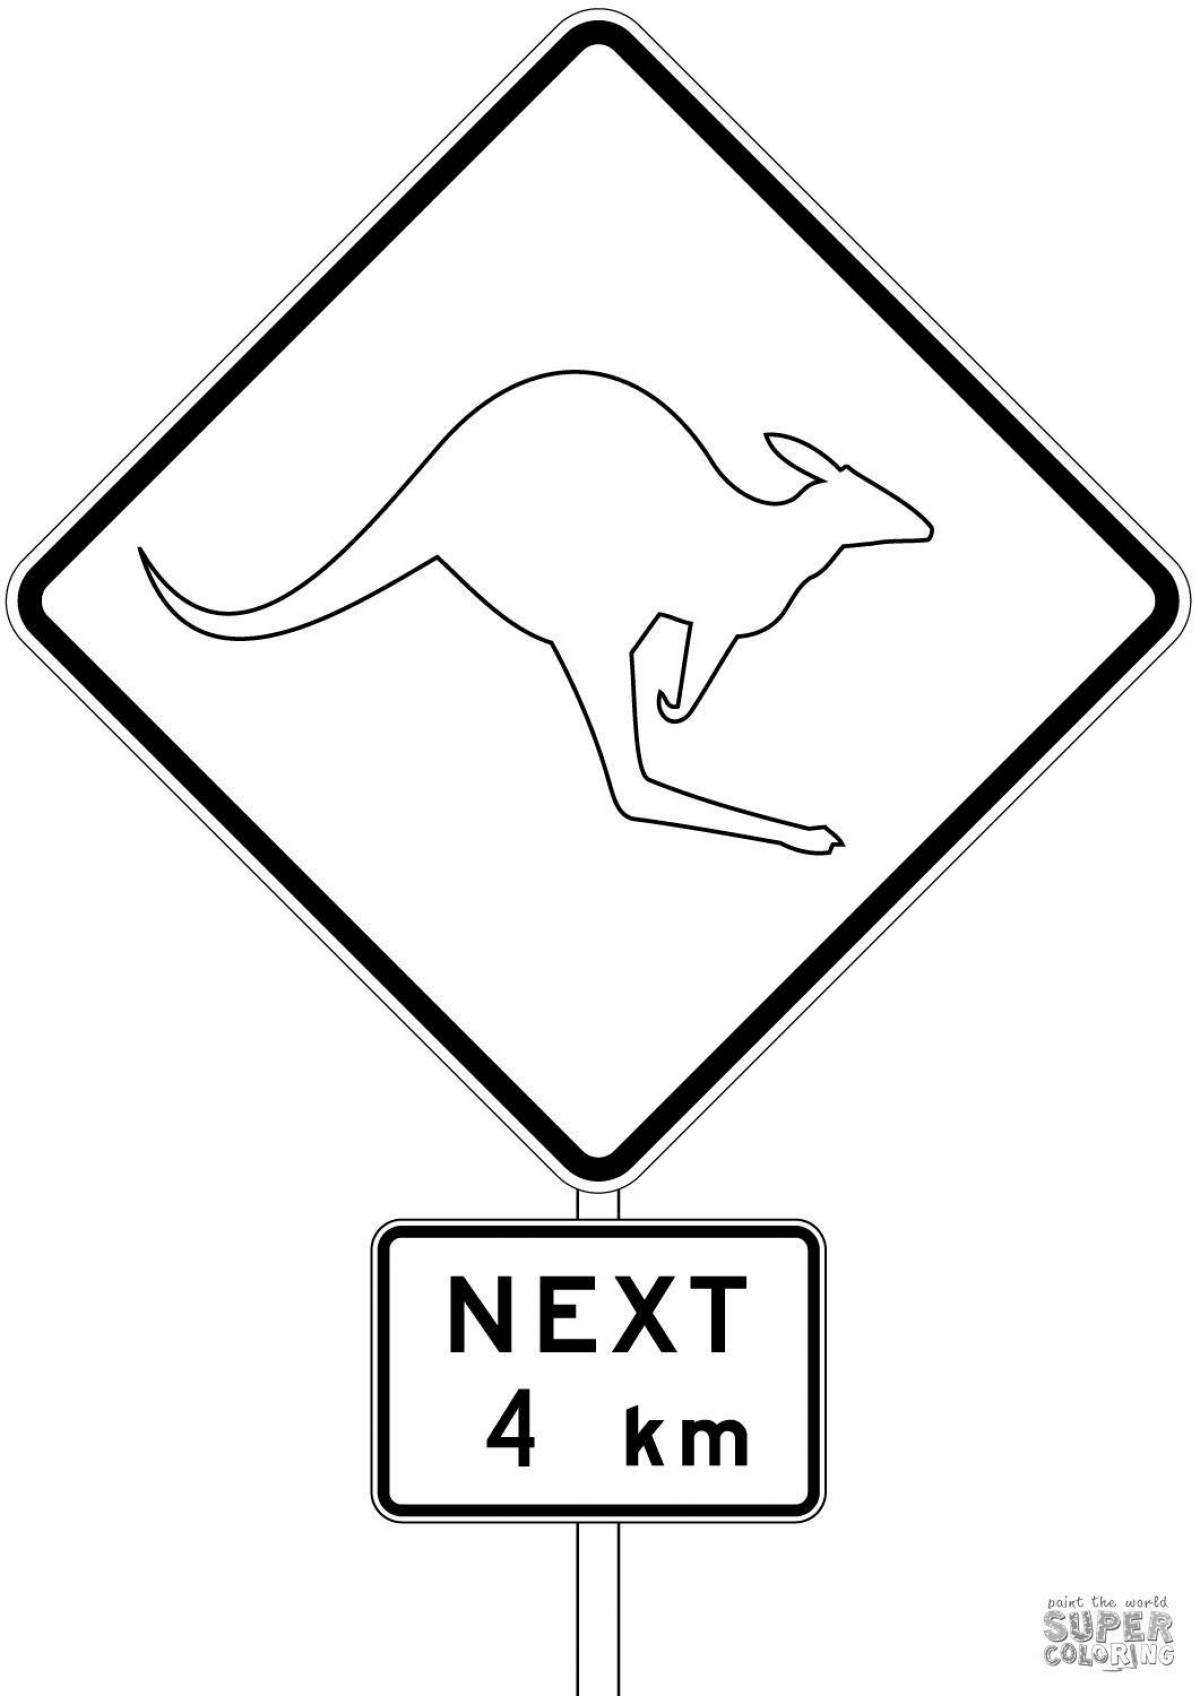 Mystical coloring wild animals traffic sign